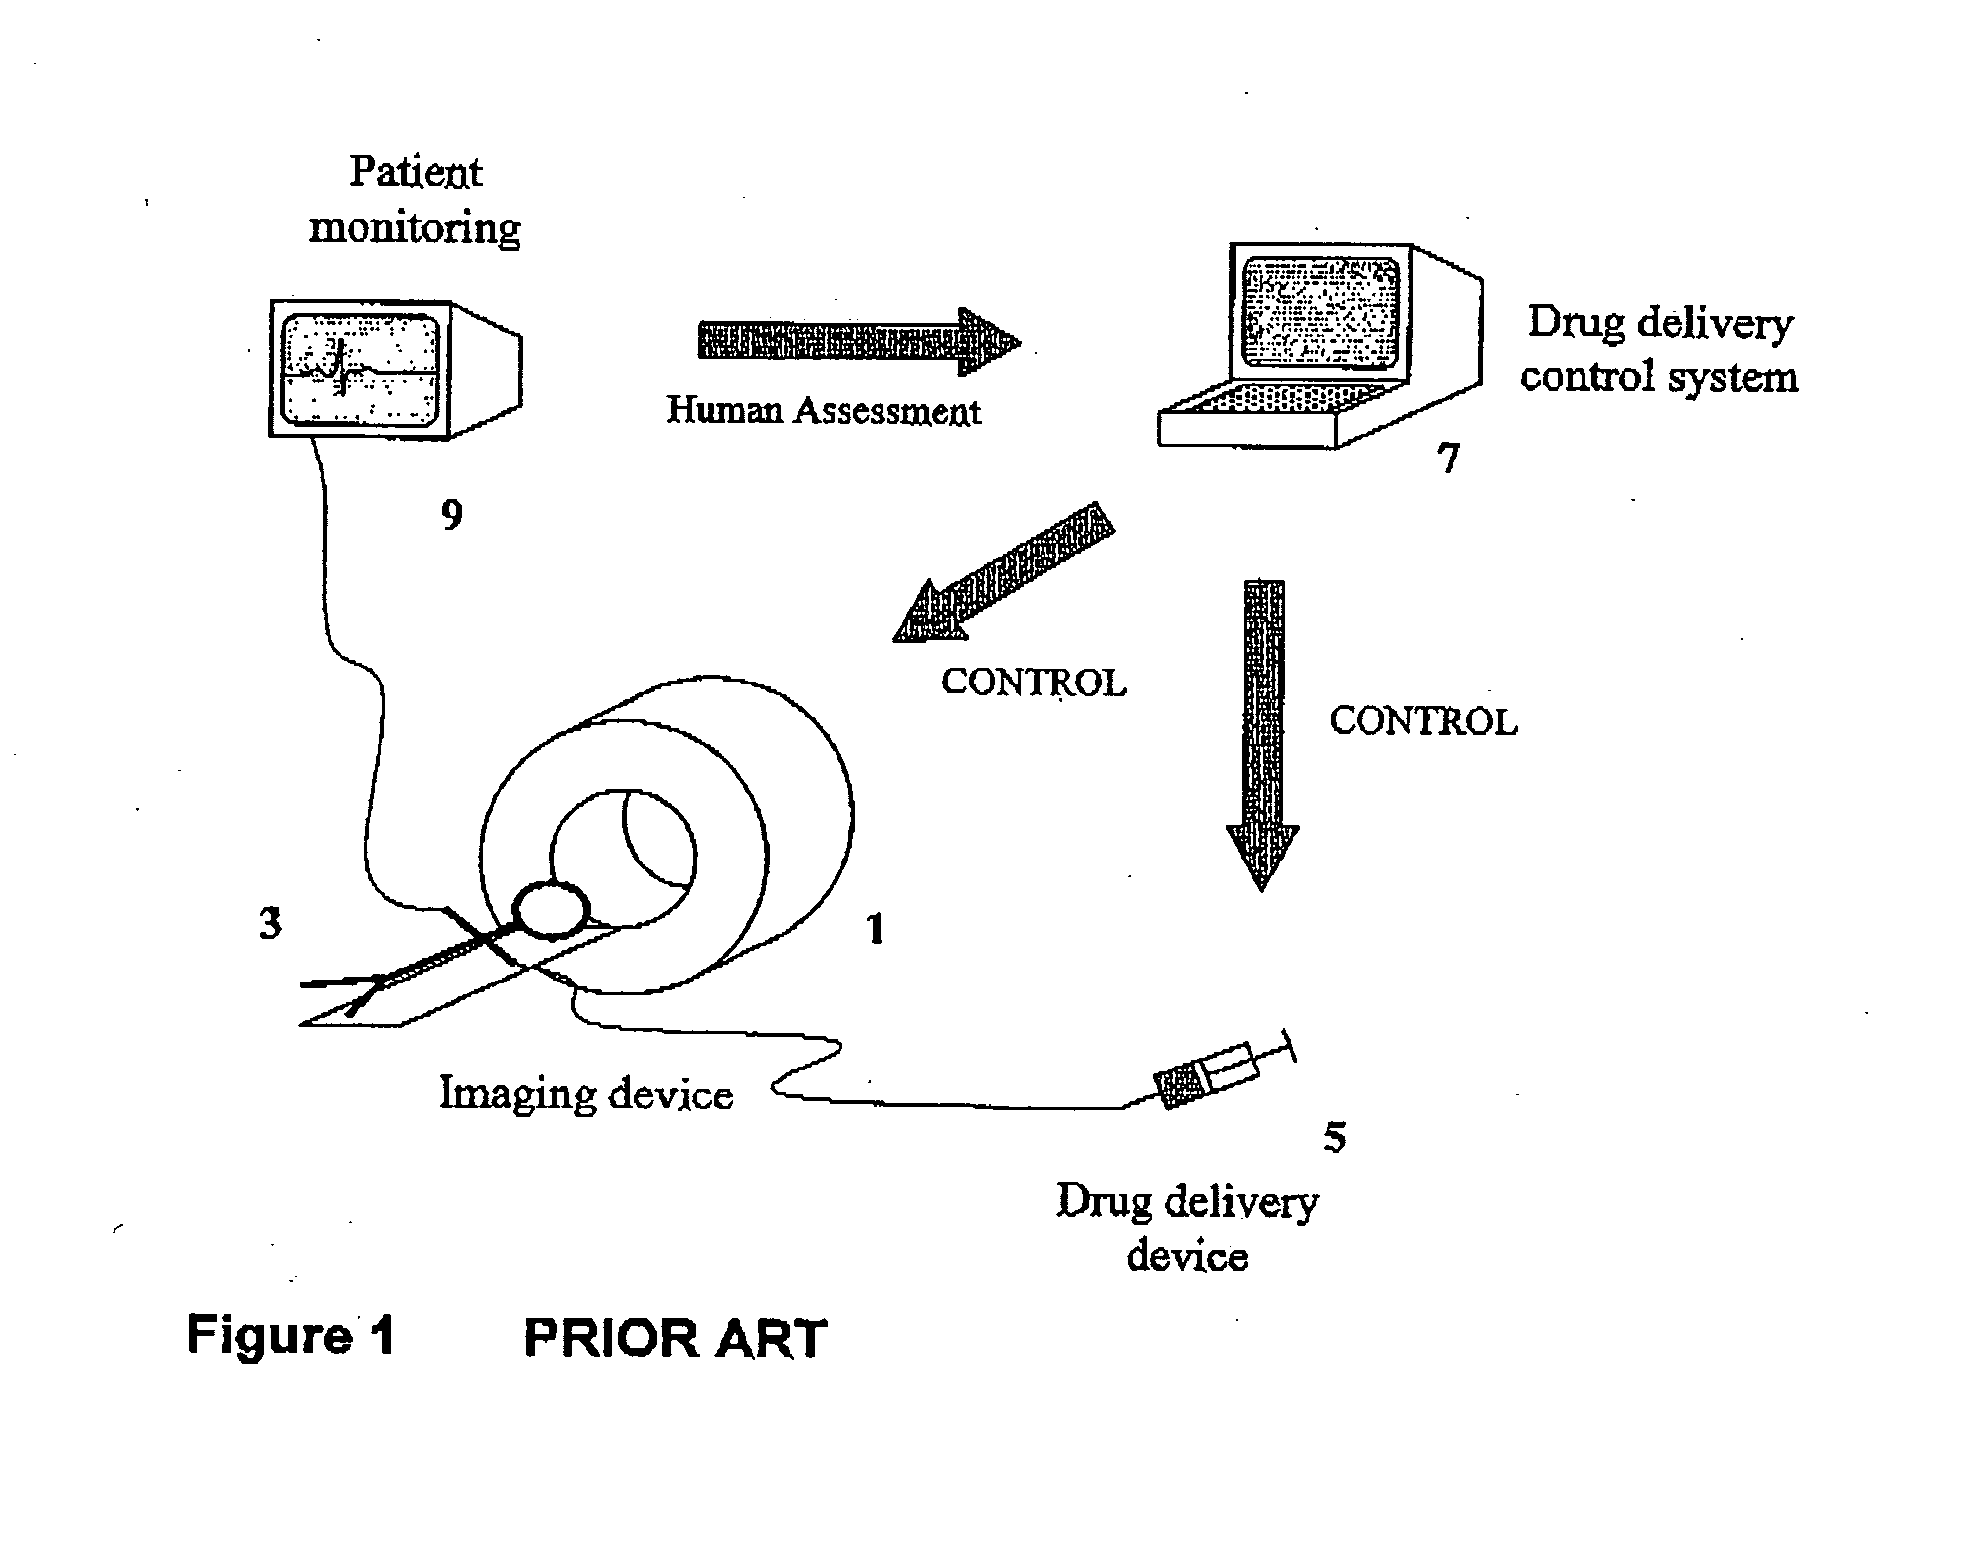 System for controlling medical data acquisition processes